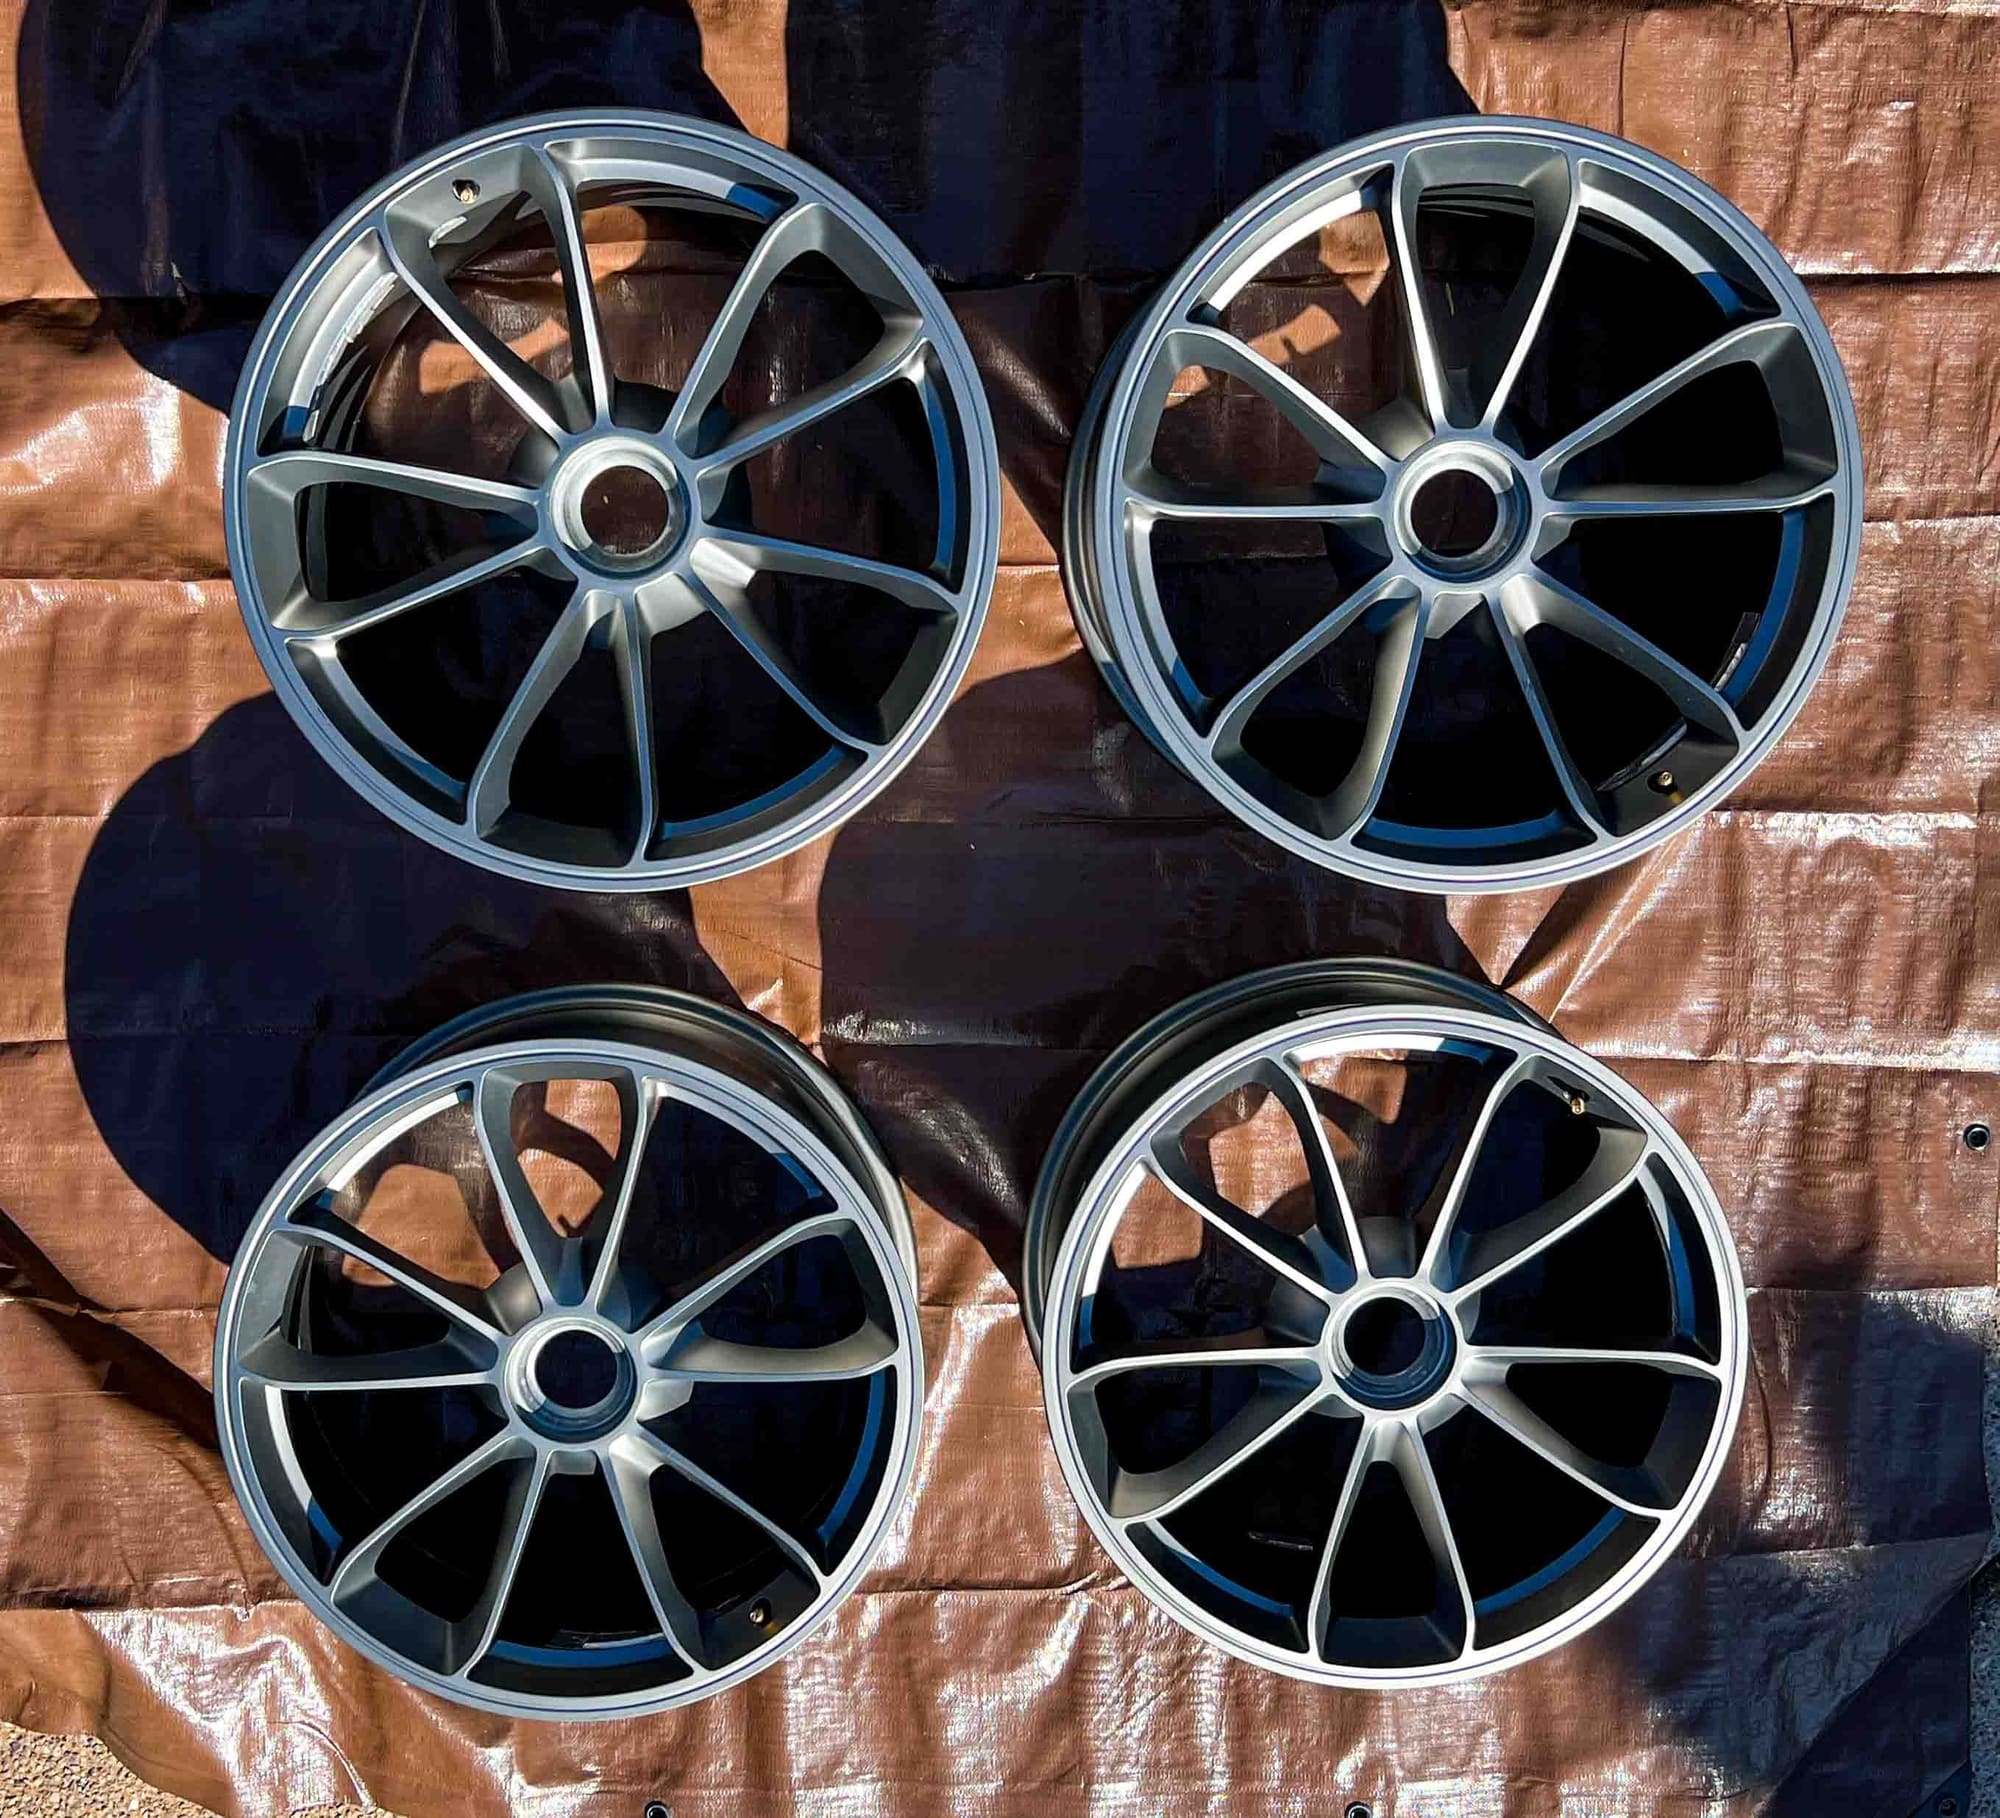 Wheels and Tires/Axles - Factory 991.2 GT3 Wheels - Excellent Condition - Used - 2016 to 2019 Porsche GT3 - Scottsdale, AZ 85255, United States